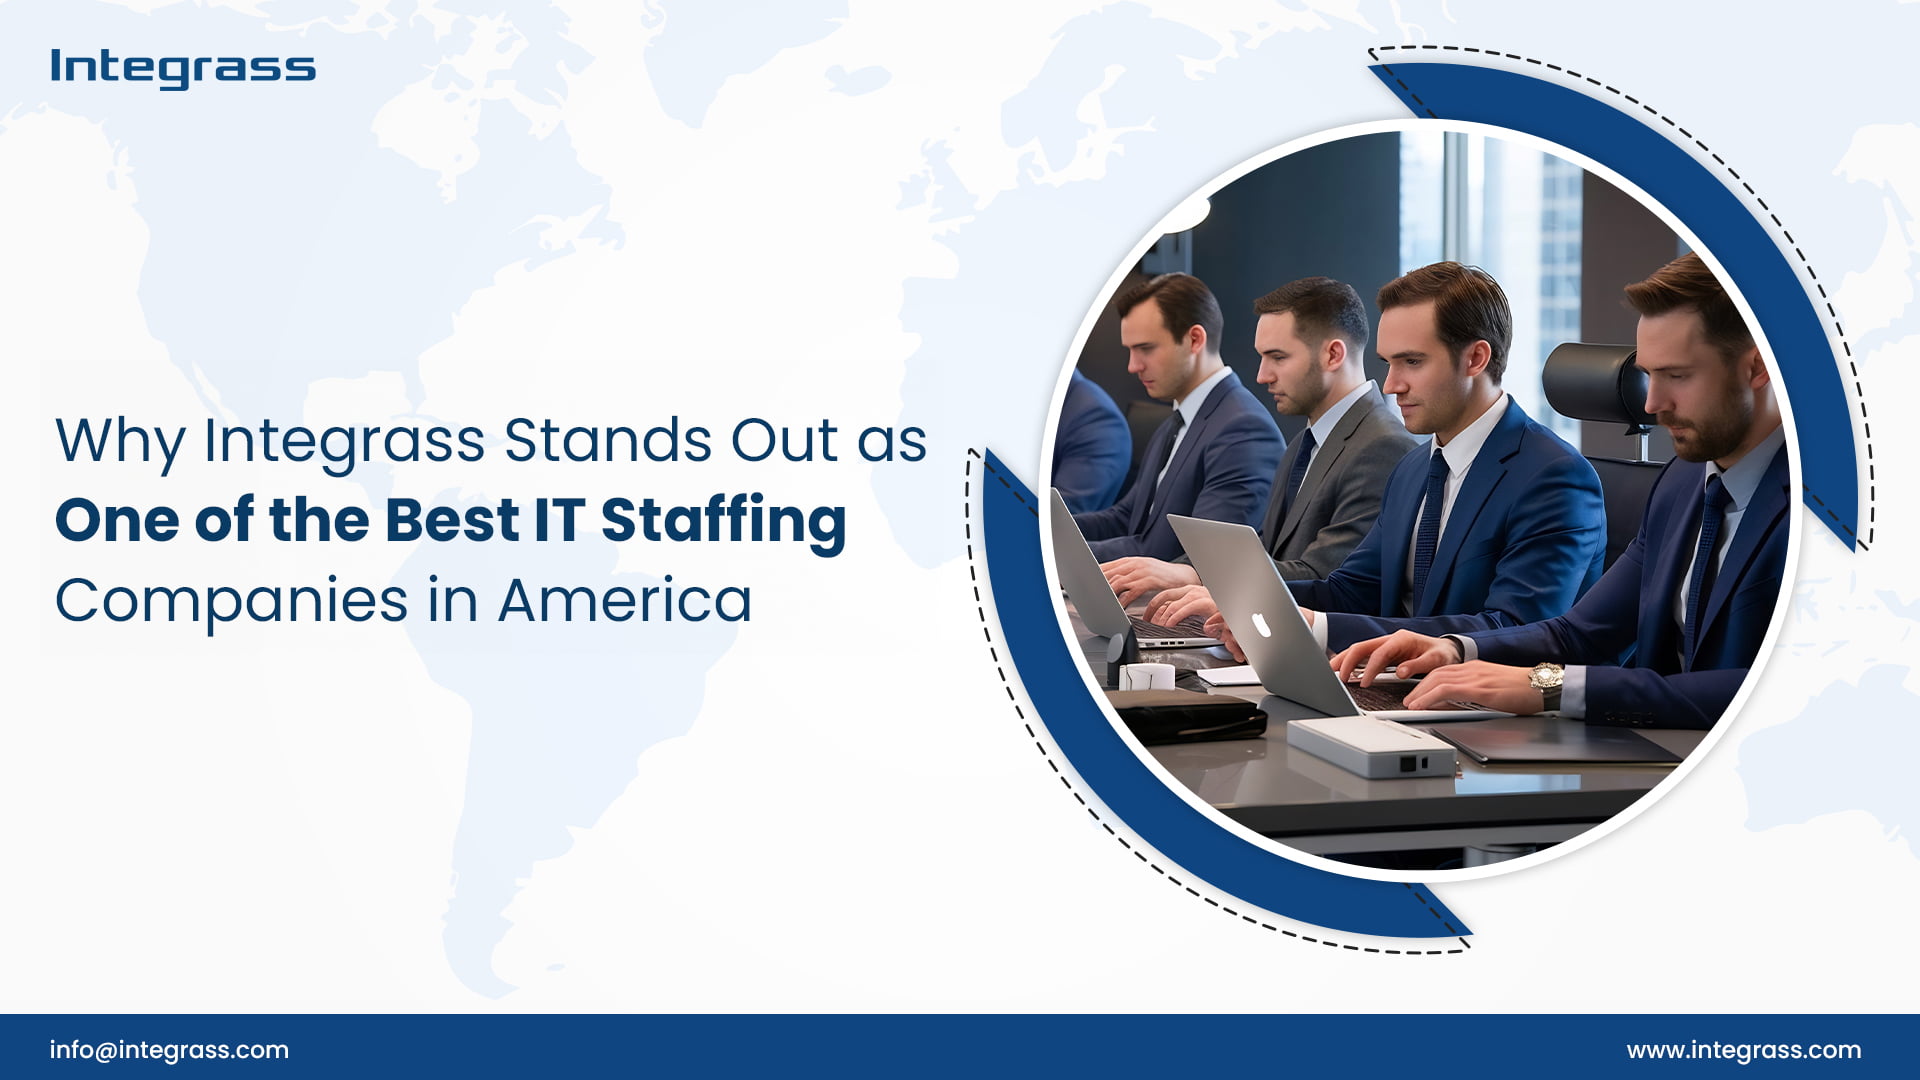 This blog post image describes Why Integrass Stands Out as One of the Best IT Staffing Companies in America